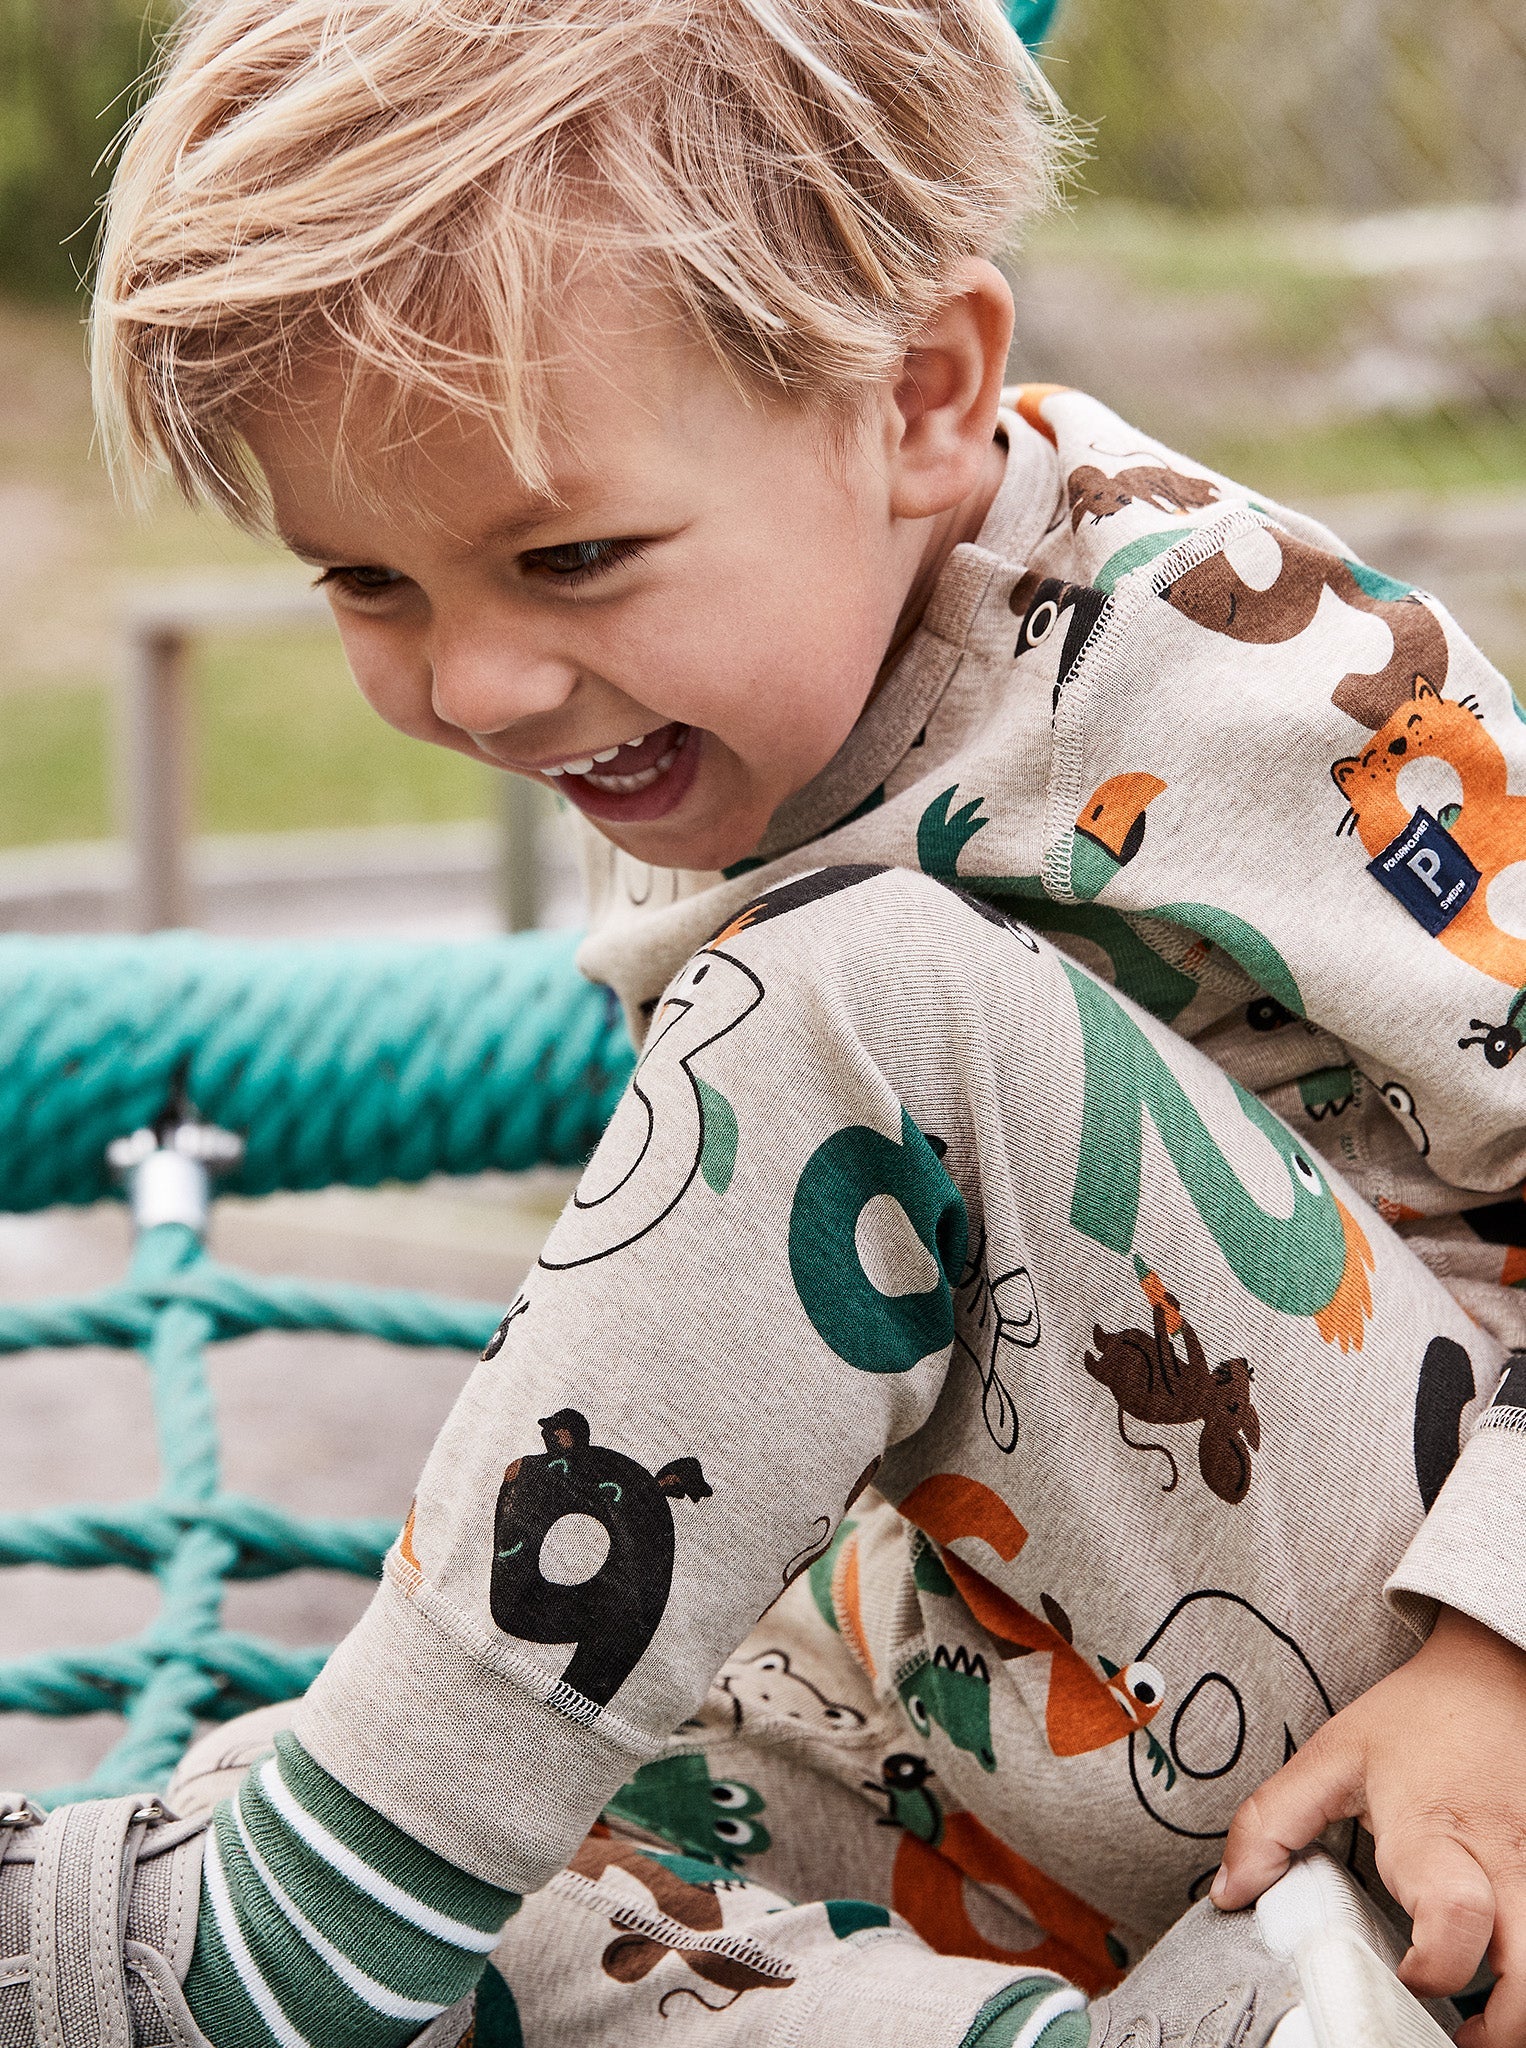 Organic Cotton Beige Kids Top from the Polarn O. Pyret Kidswear collection. Ethically produced kids clothing.